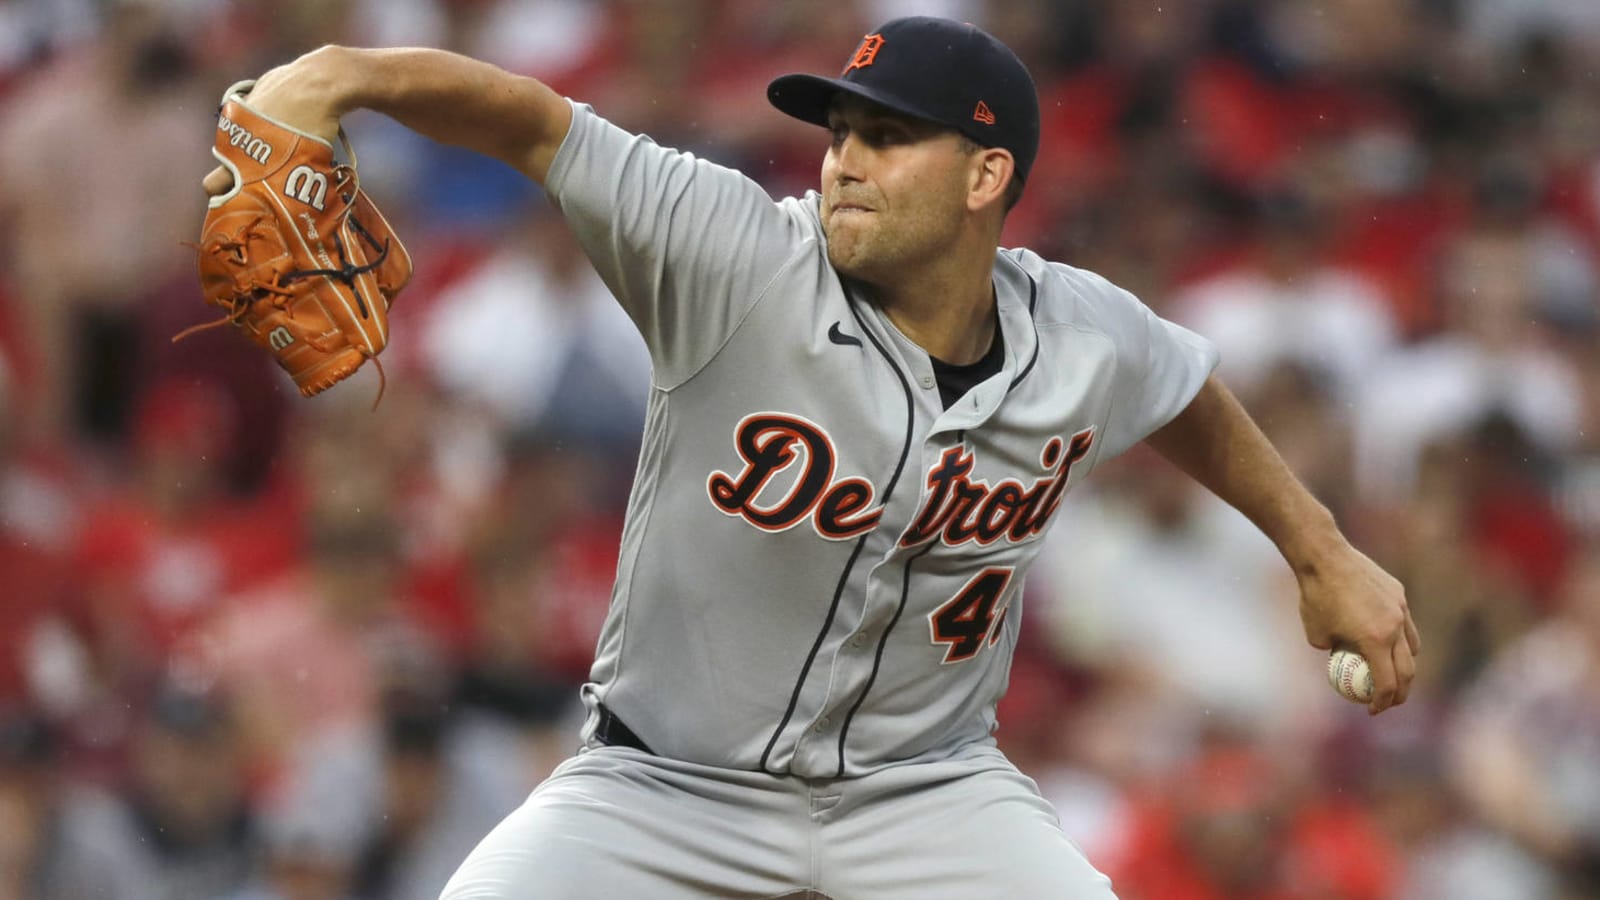 Matt Boyd scratched from start due to recurring elbow soreness